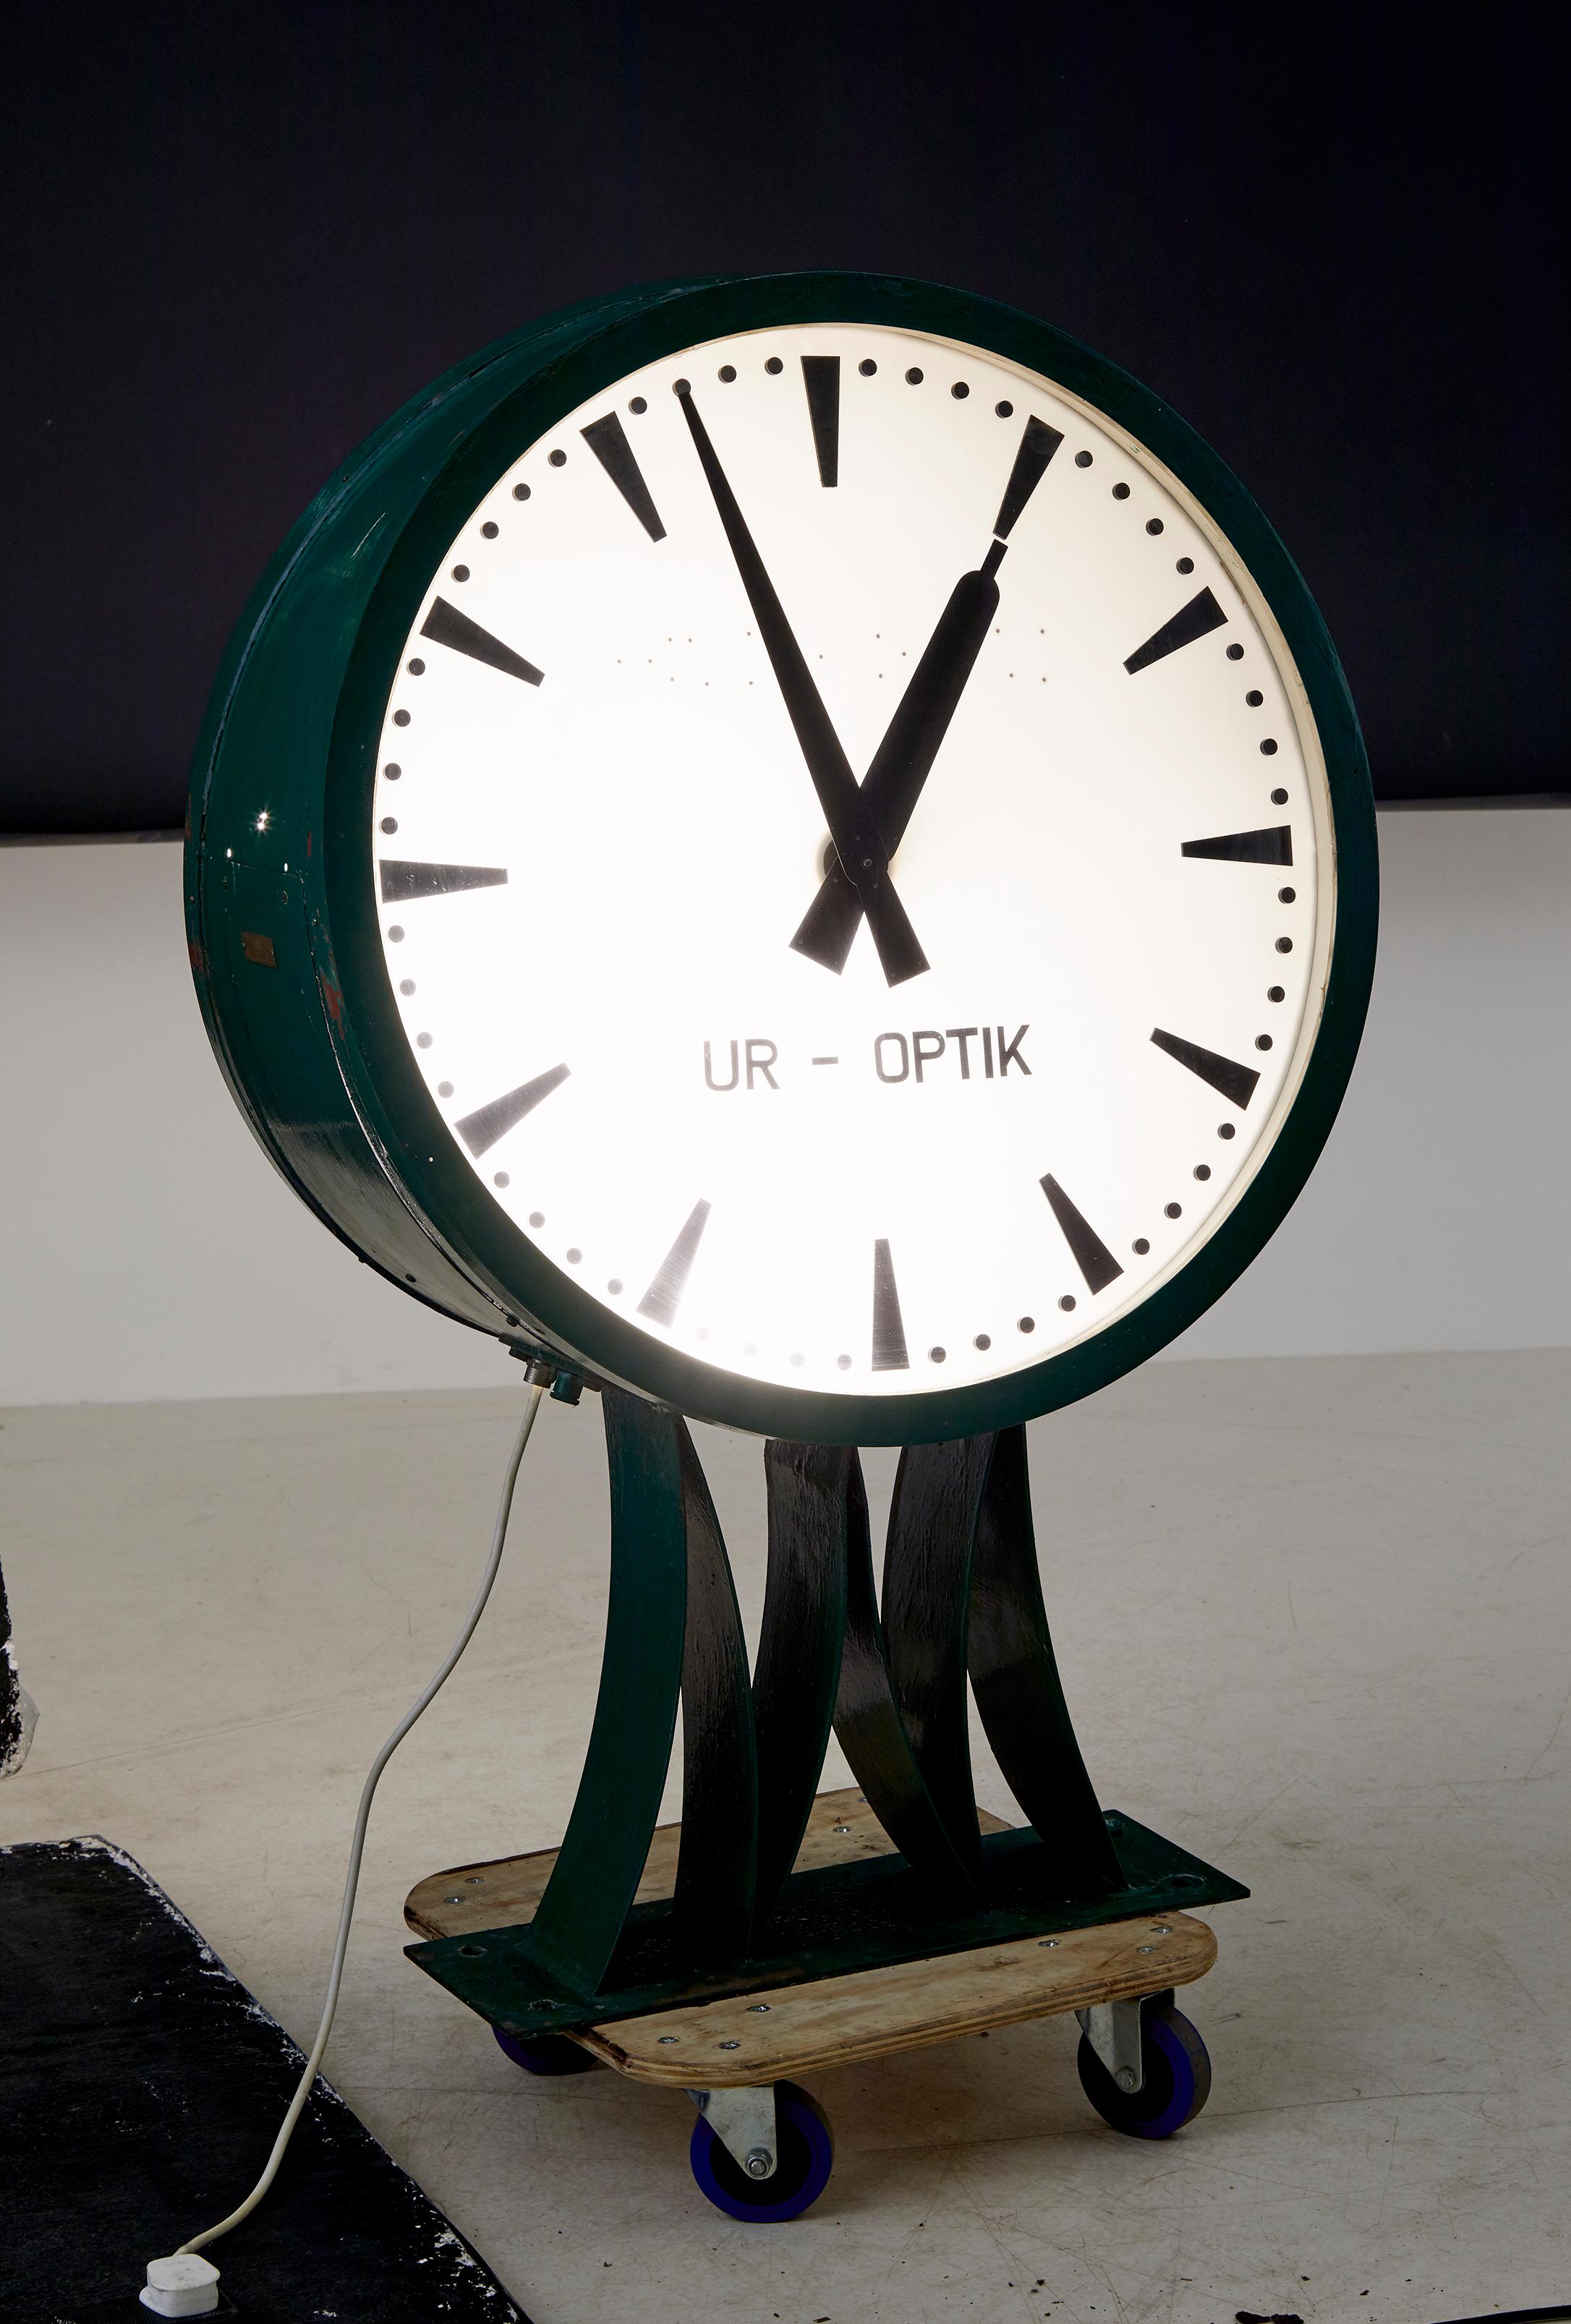 Mid 20th century westerstrands swedish industrial station clock circa 1963.

Here we can offer a rare large wall clock stamped by westerstrands circa 1963. Lights up when connected. It is wired and works (please see picture with it working) but we